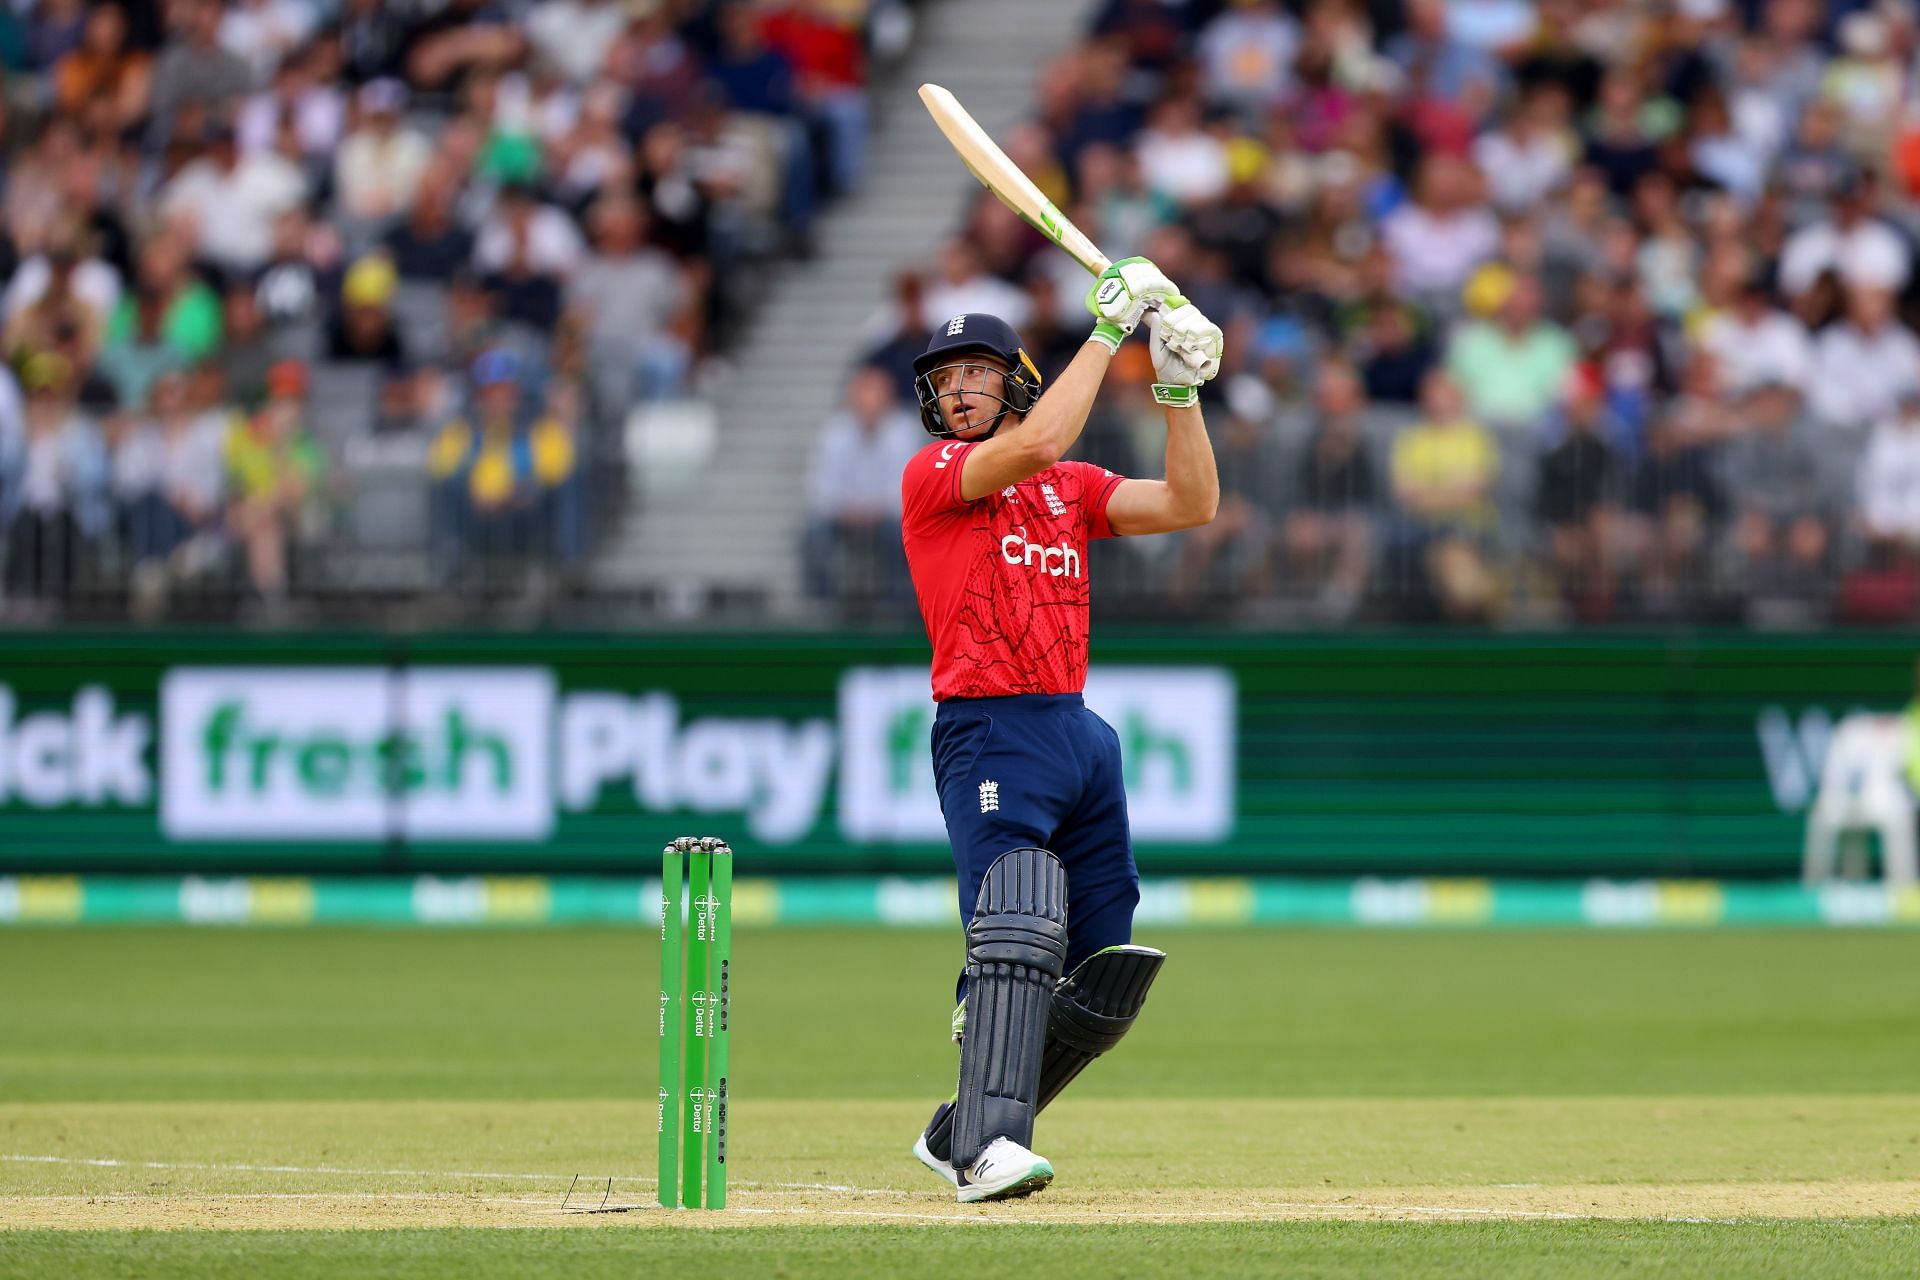 England possess some of the most explosive batters in world cricket.